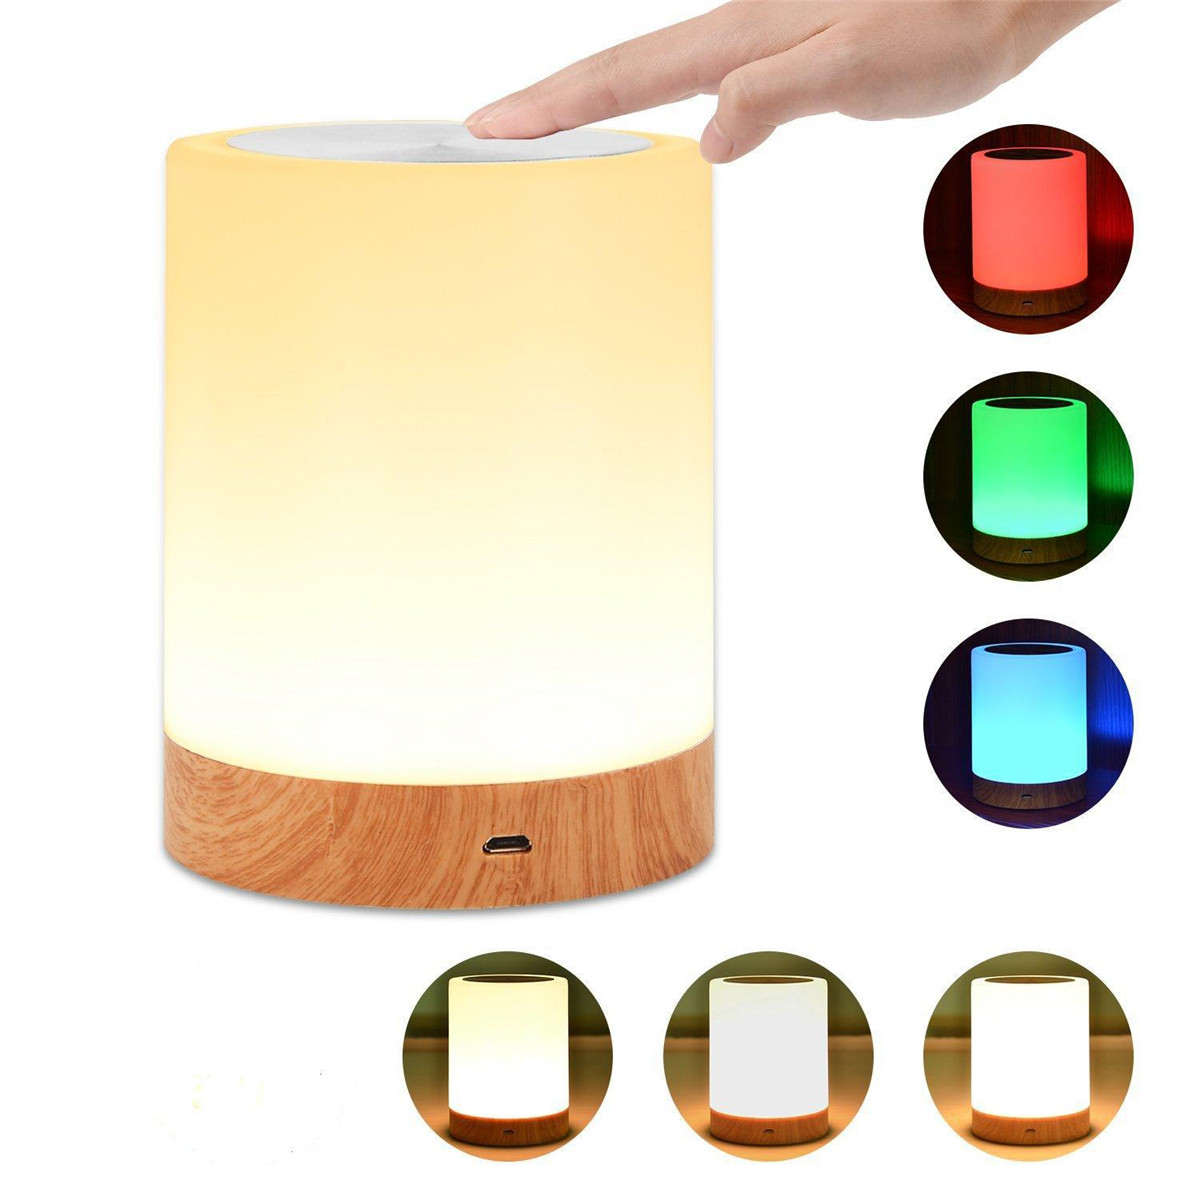 Dimmable-Touch-LED-Night-Light-USB-Charging-Colorful-Bedroom-Table-Lamp-Decor-Children-Gift-1689743-2